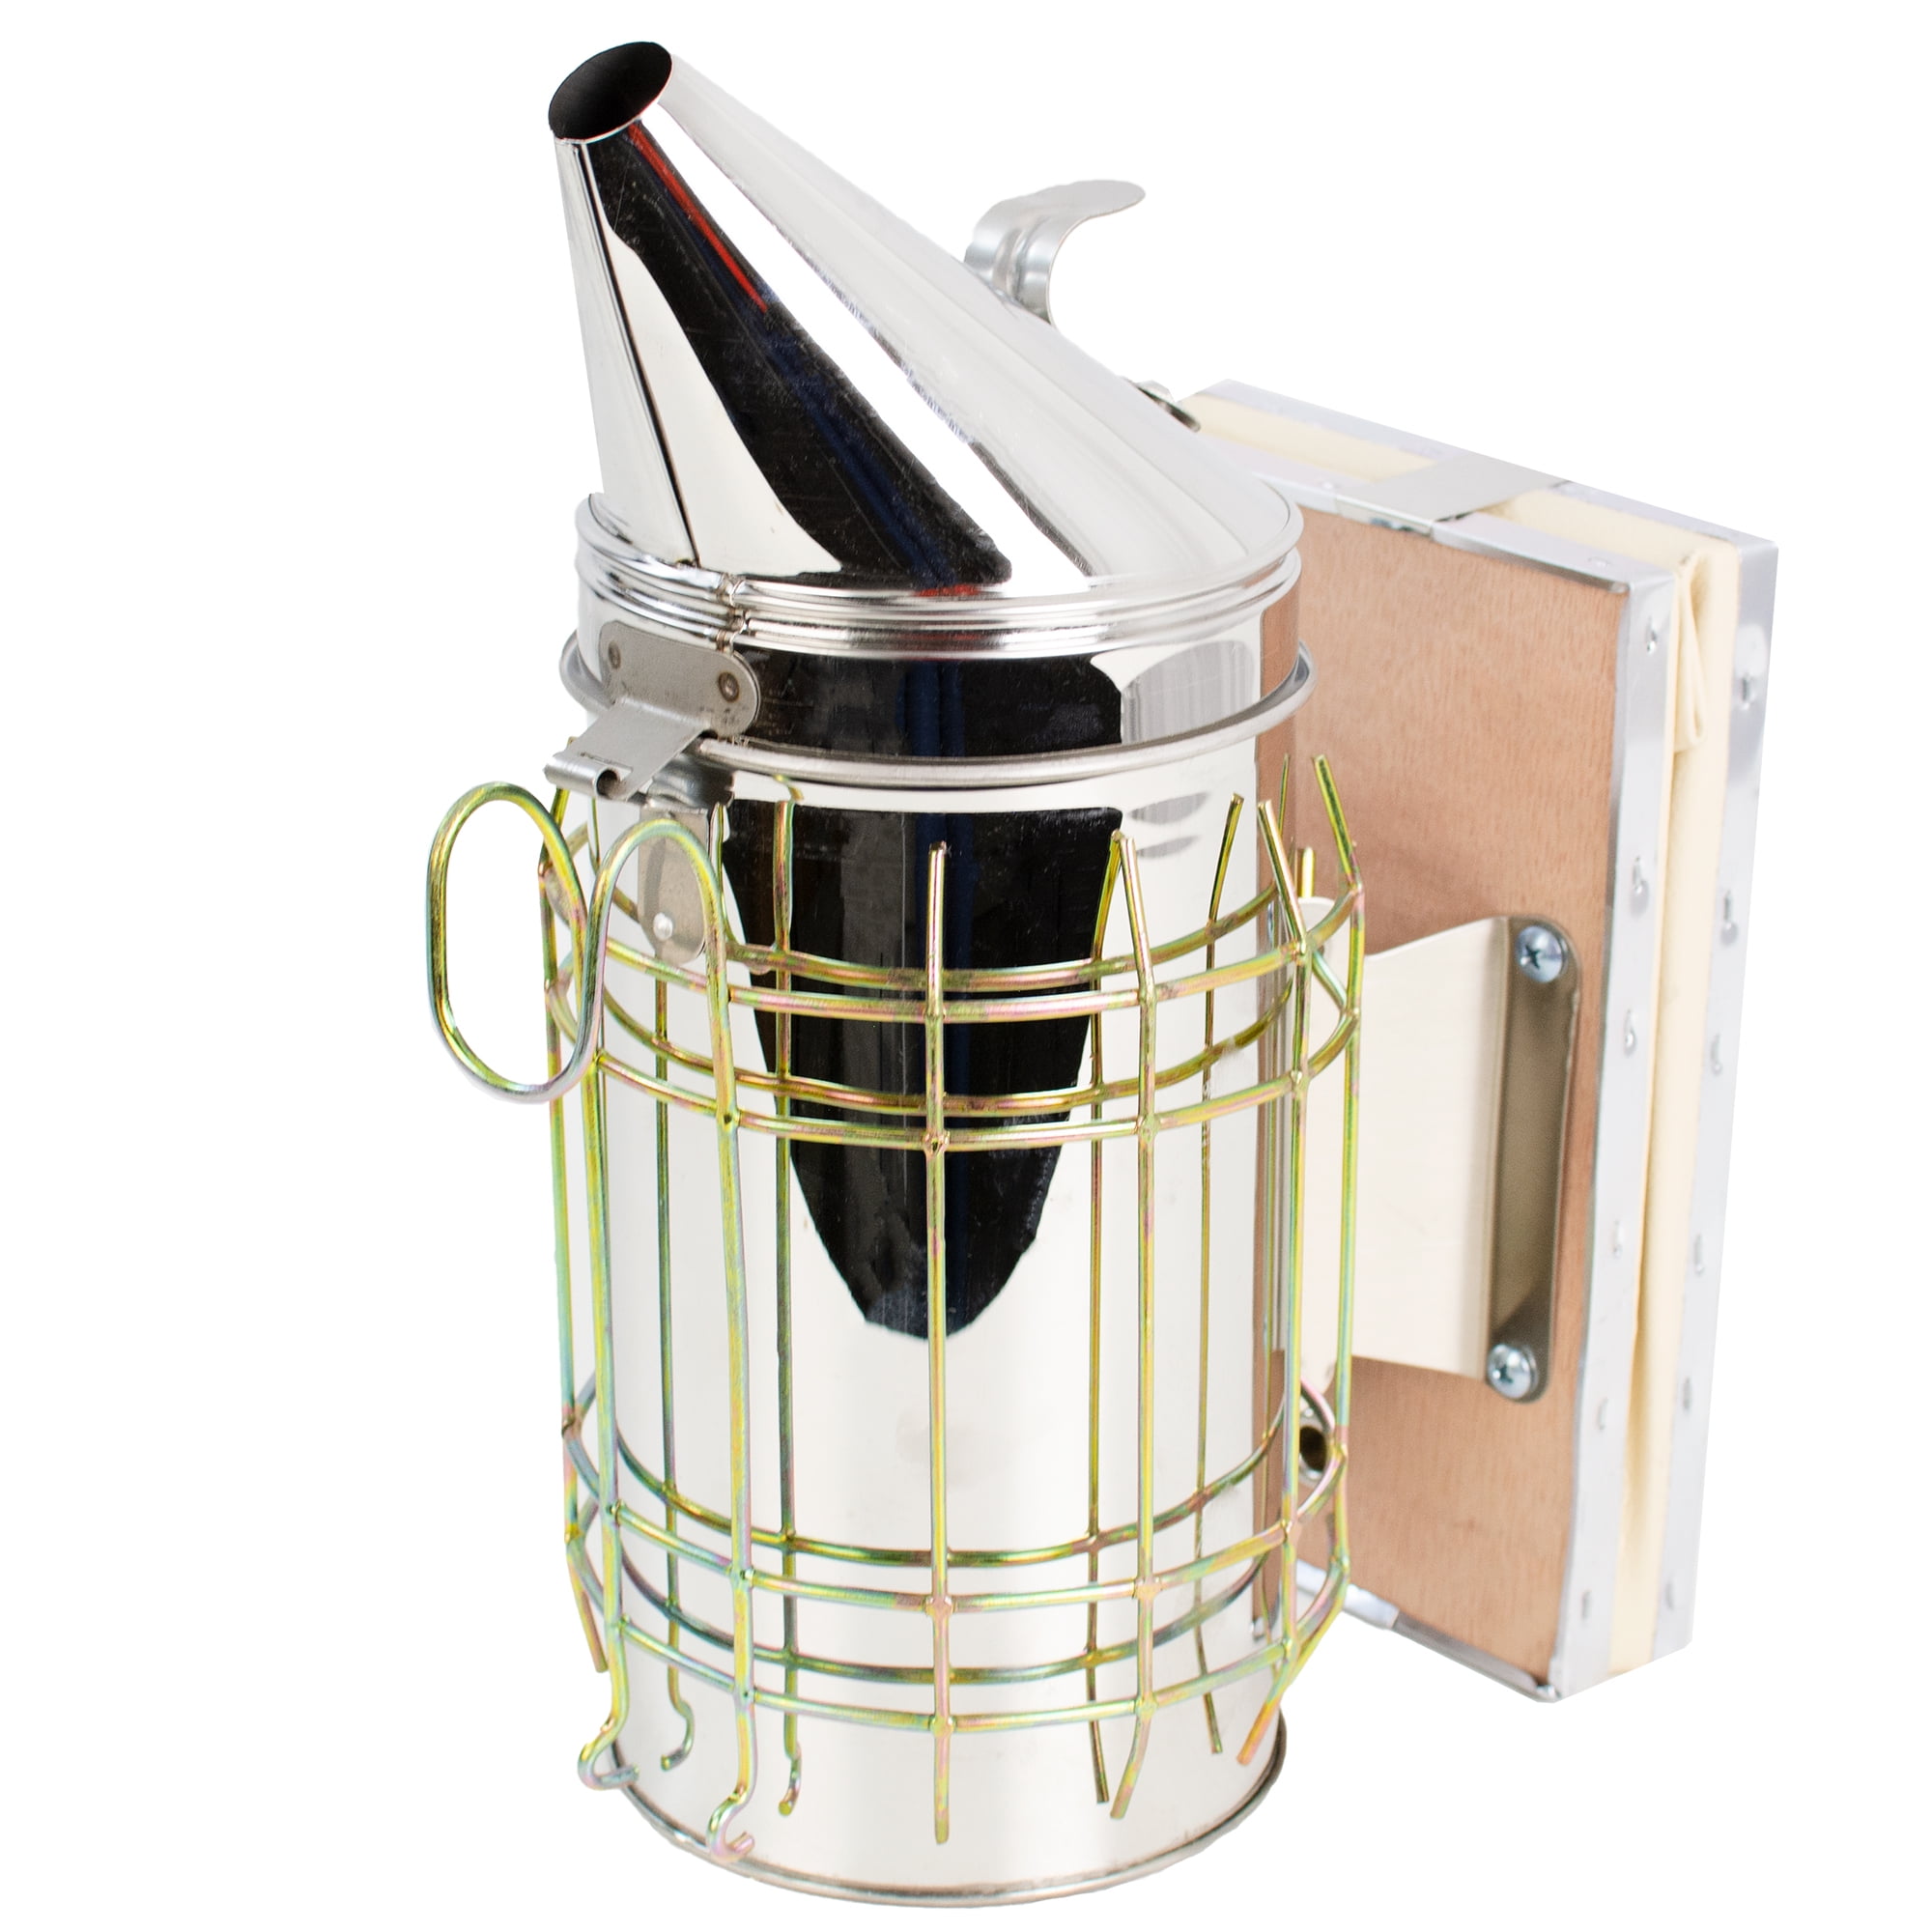 Details about   Bee Hive Smoker Stainless Steel with Heat Shield Calming Beekeeping Equipment 